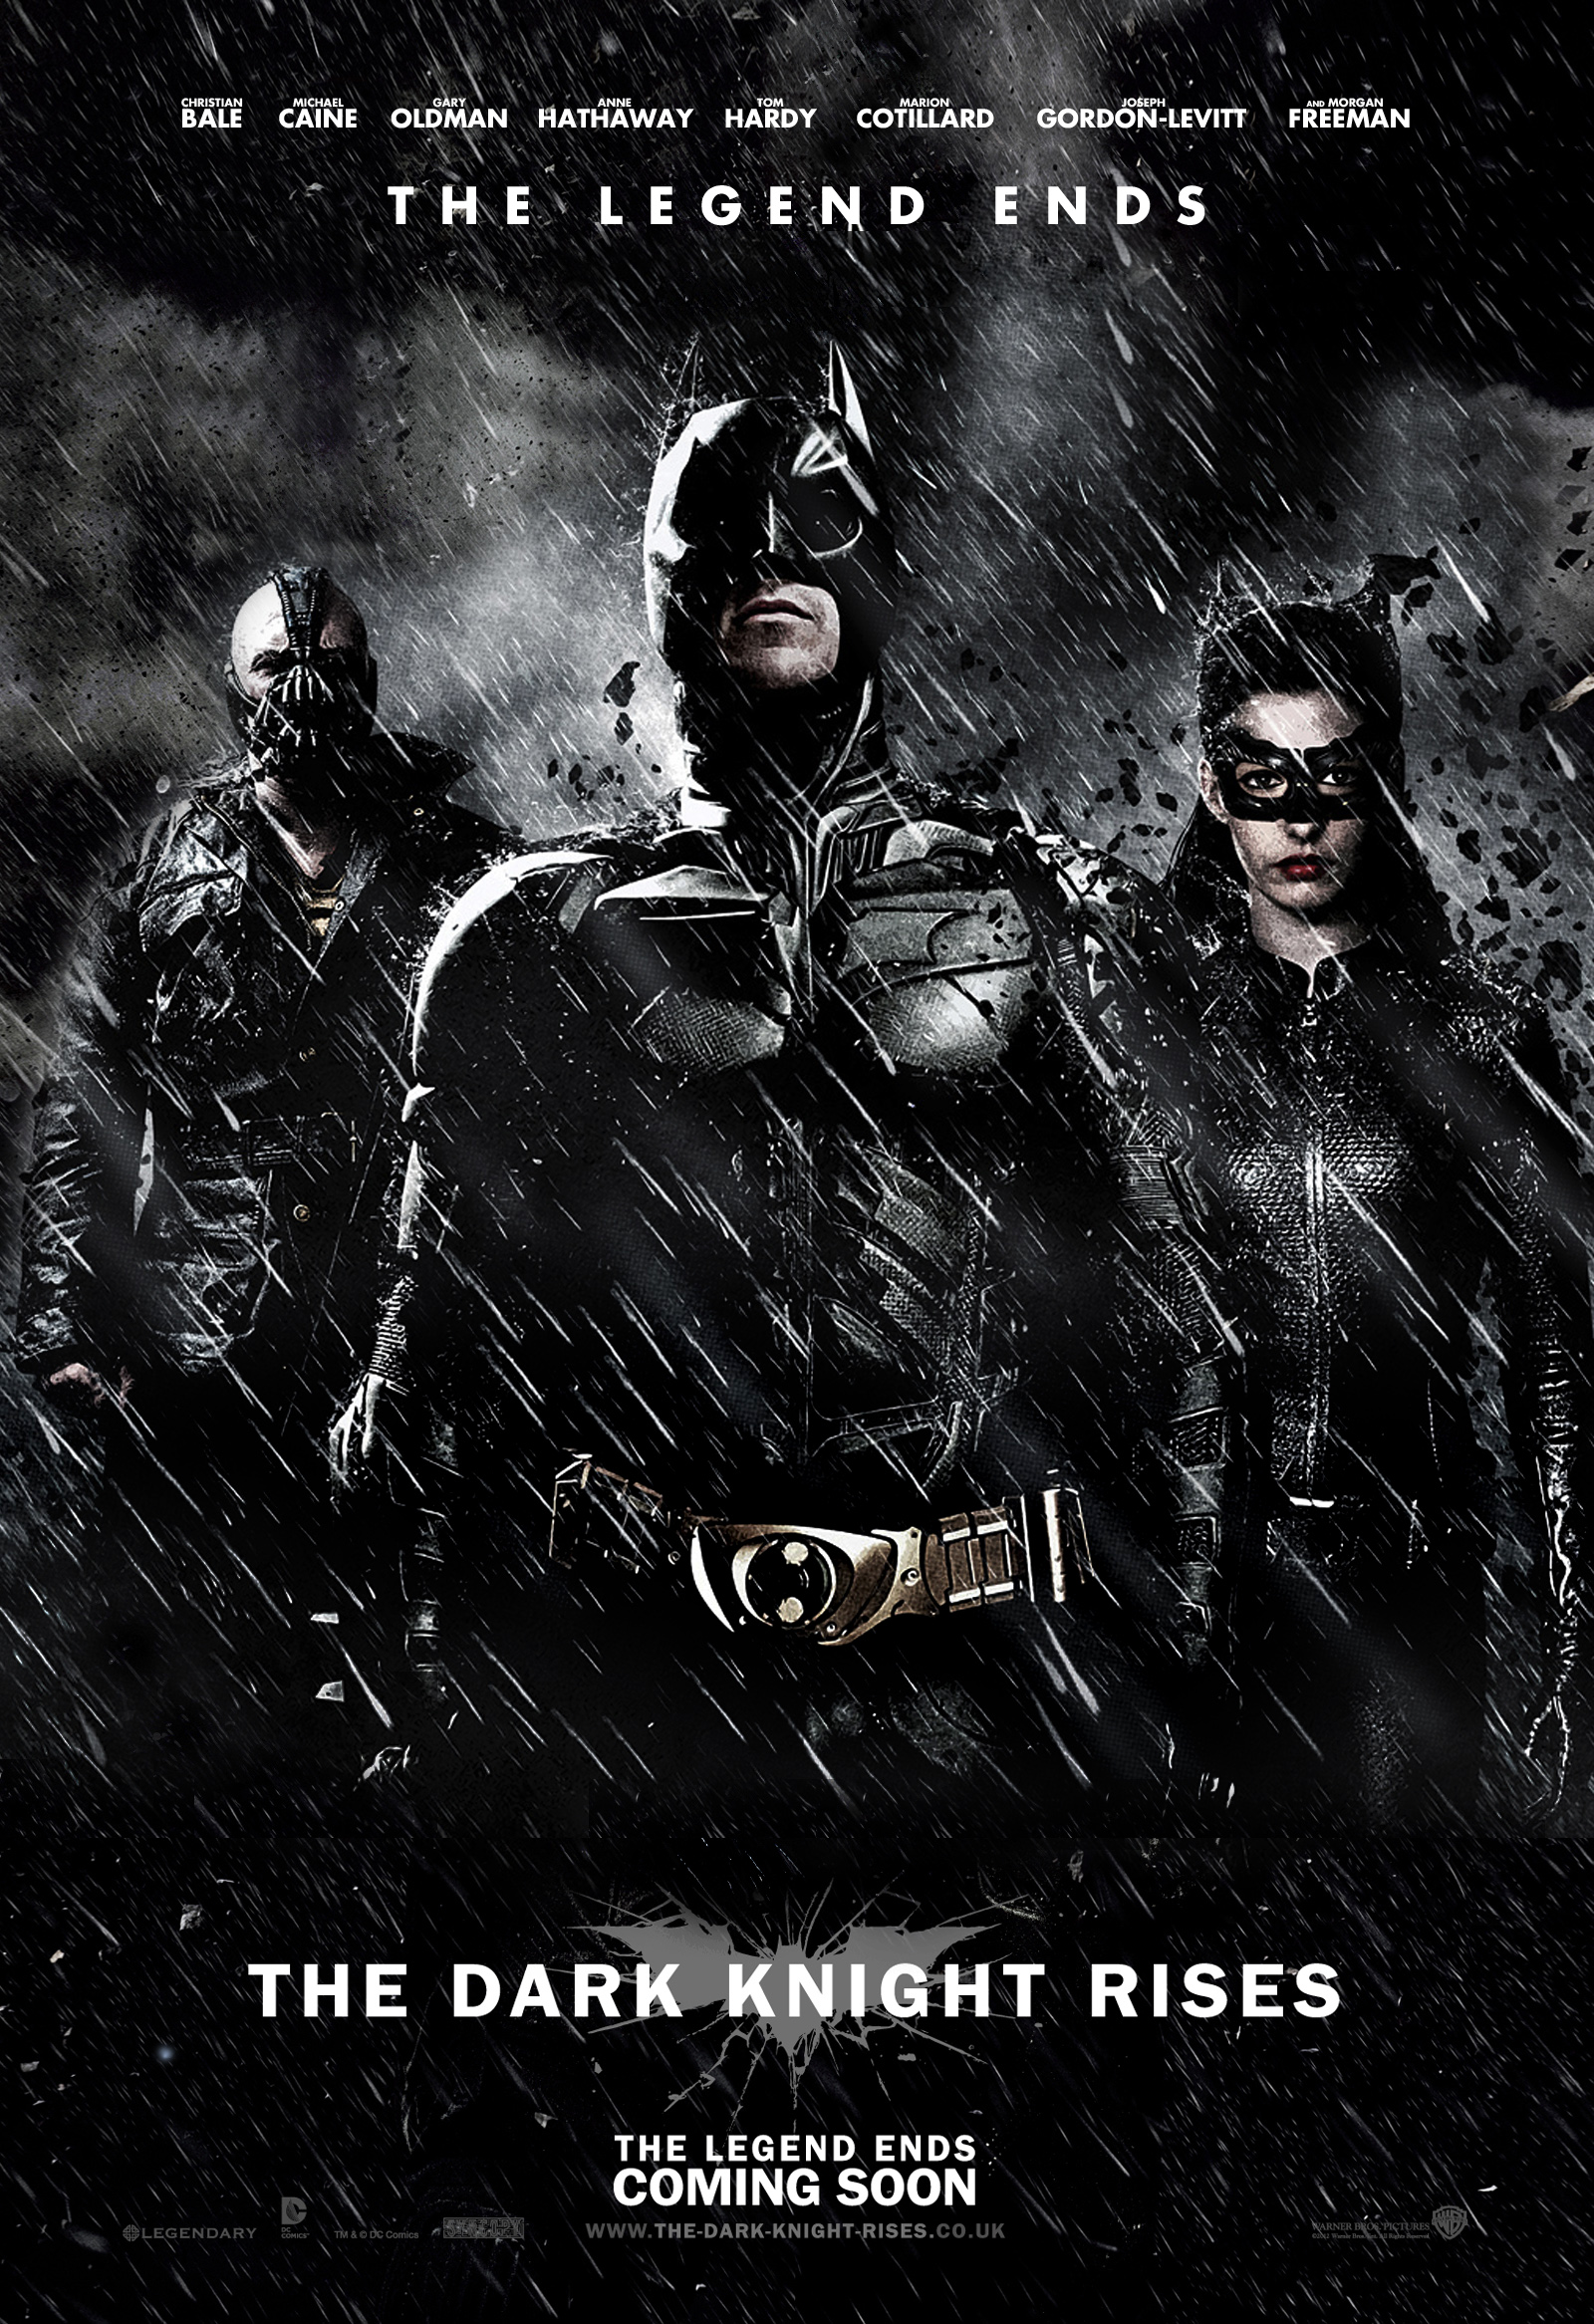 the_dark_knight_rises___poster_02_by_kh_productions-d514e29.jpg